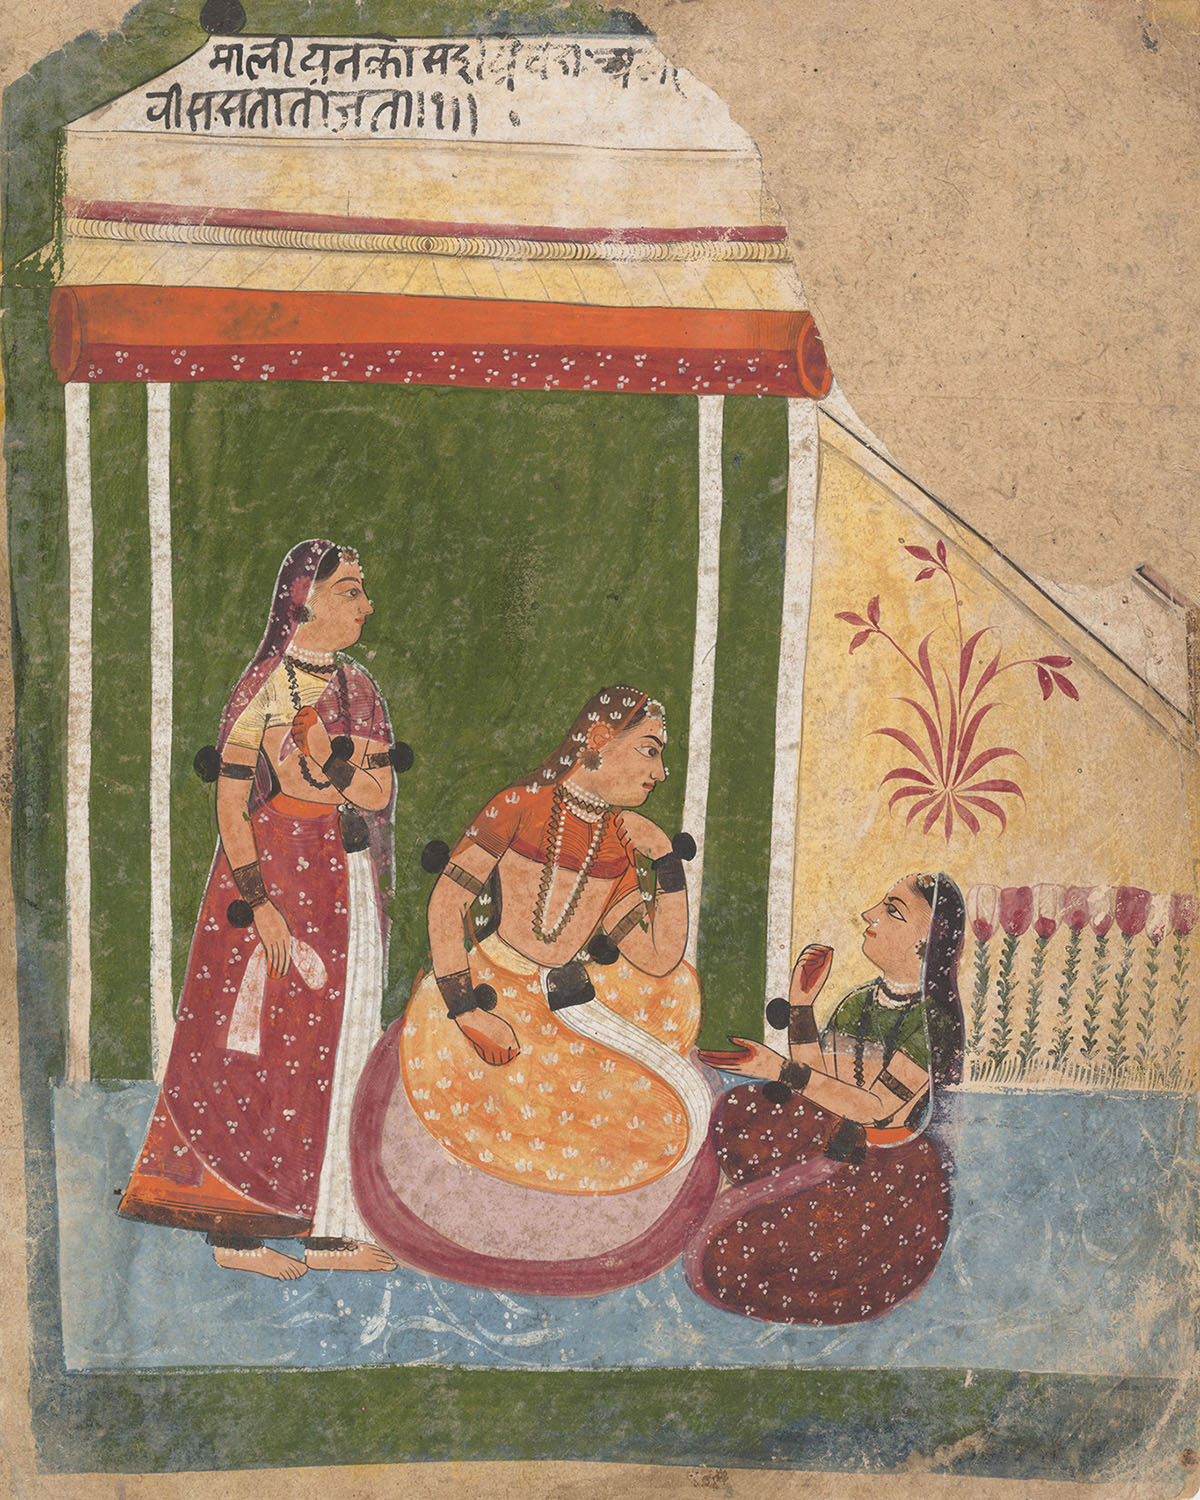 A painting depicting two seated women and one woman standing on the left in a pavilion, talking with each other.